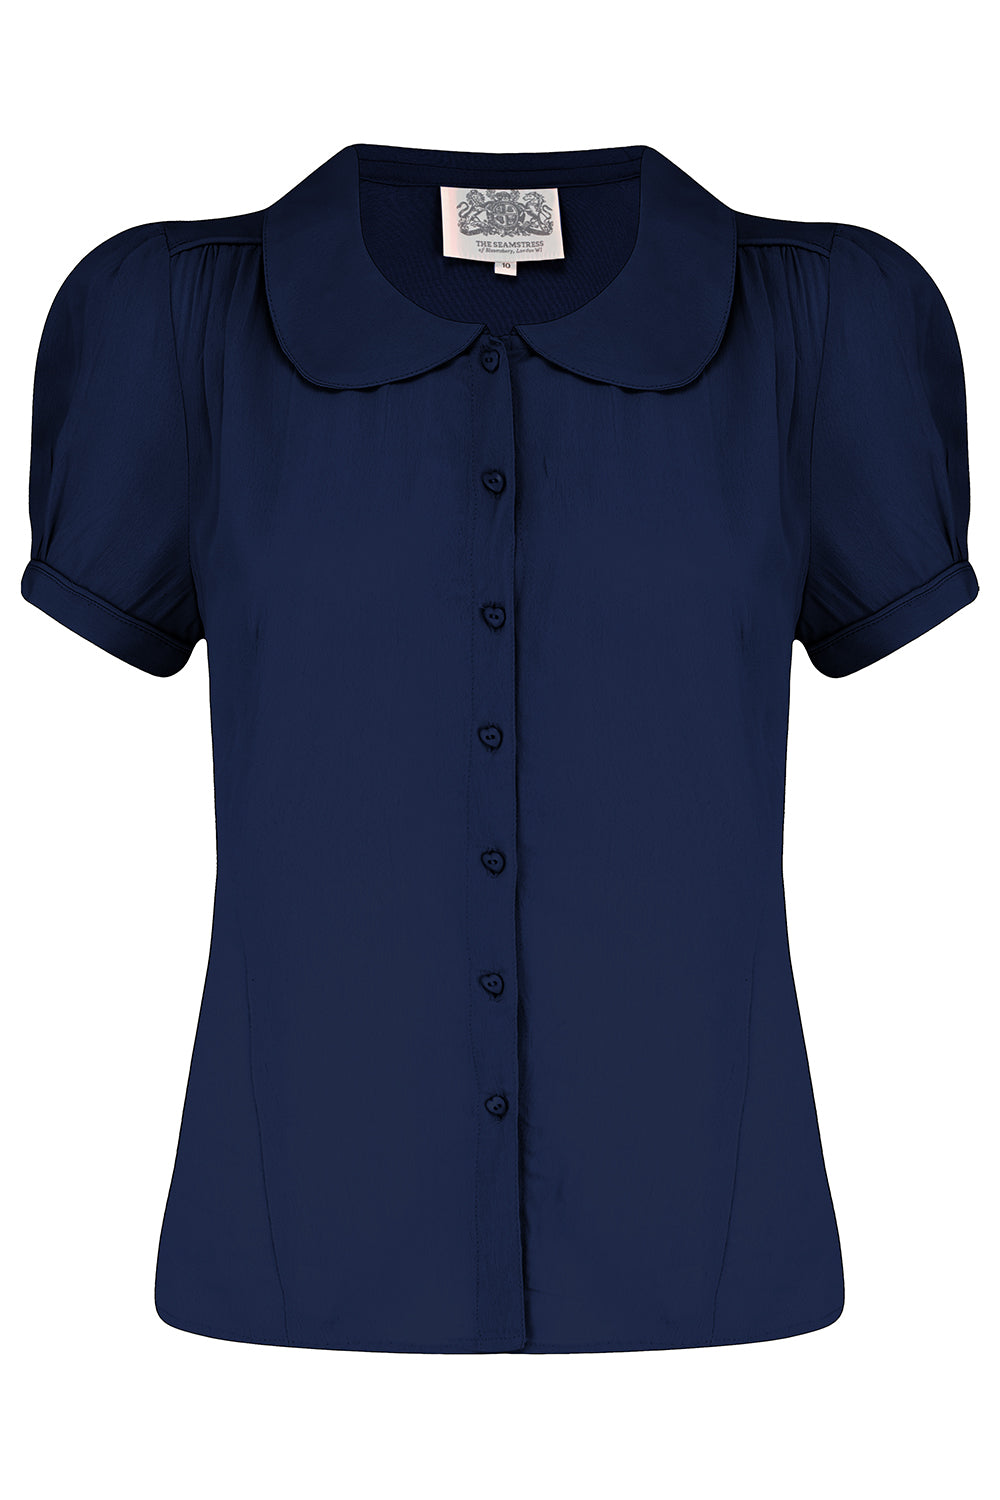 "Jive" Short Sleeve Blouse in French Navy, Classic 1940s Vintage Style